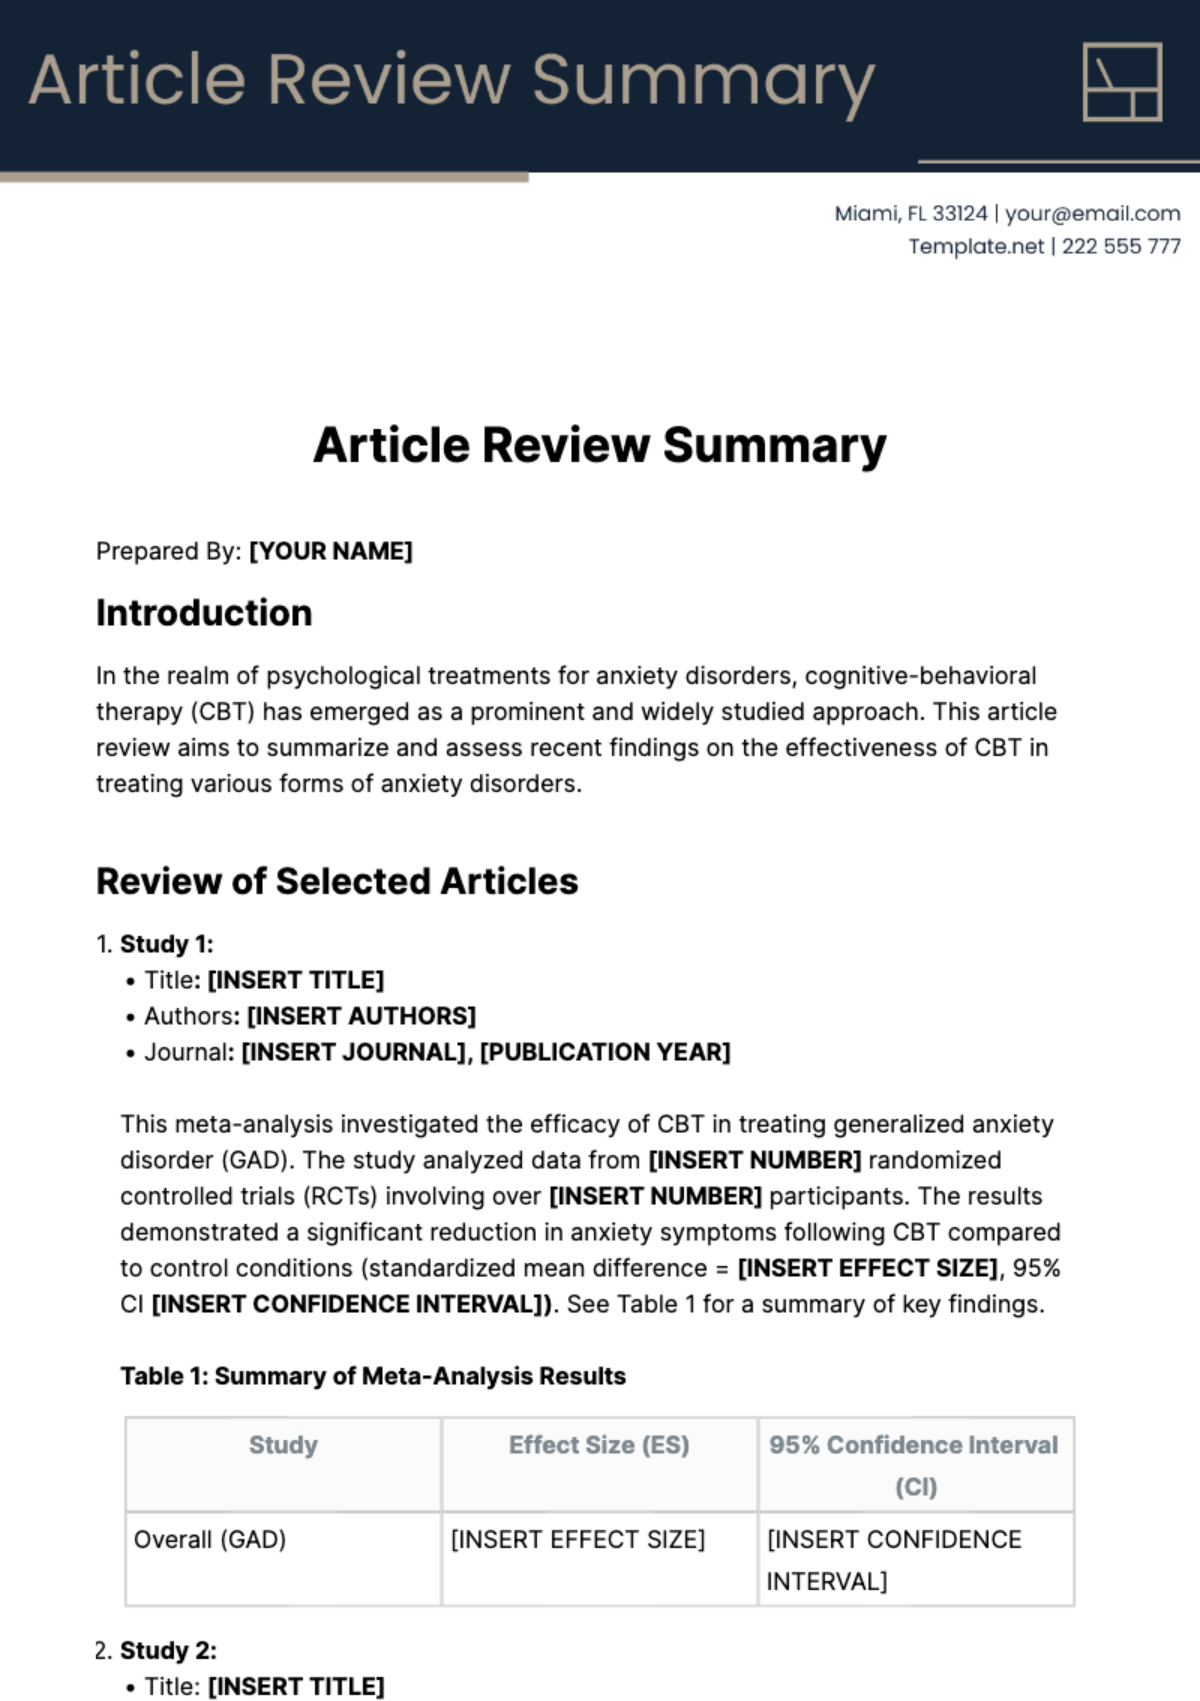 Free Article Review Summary Template